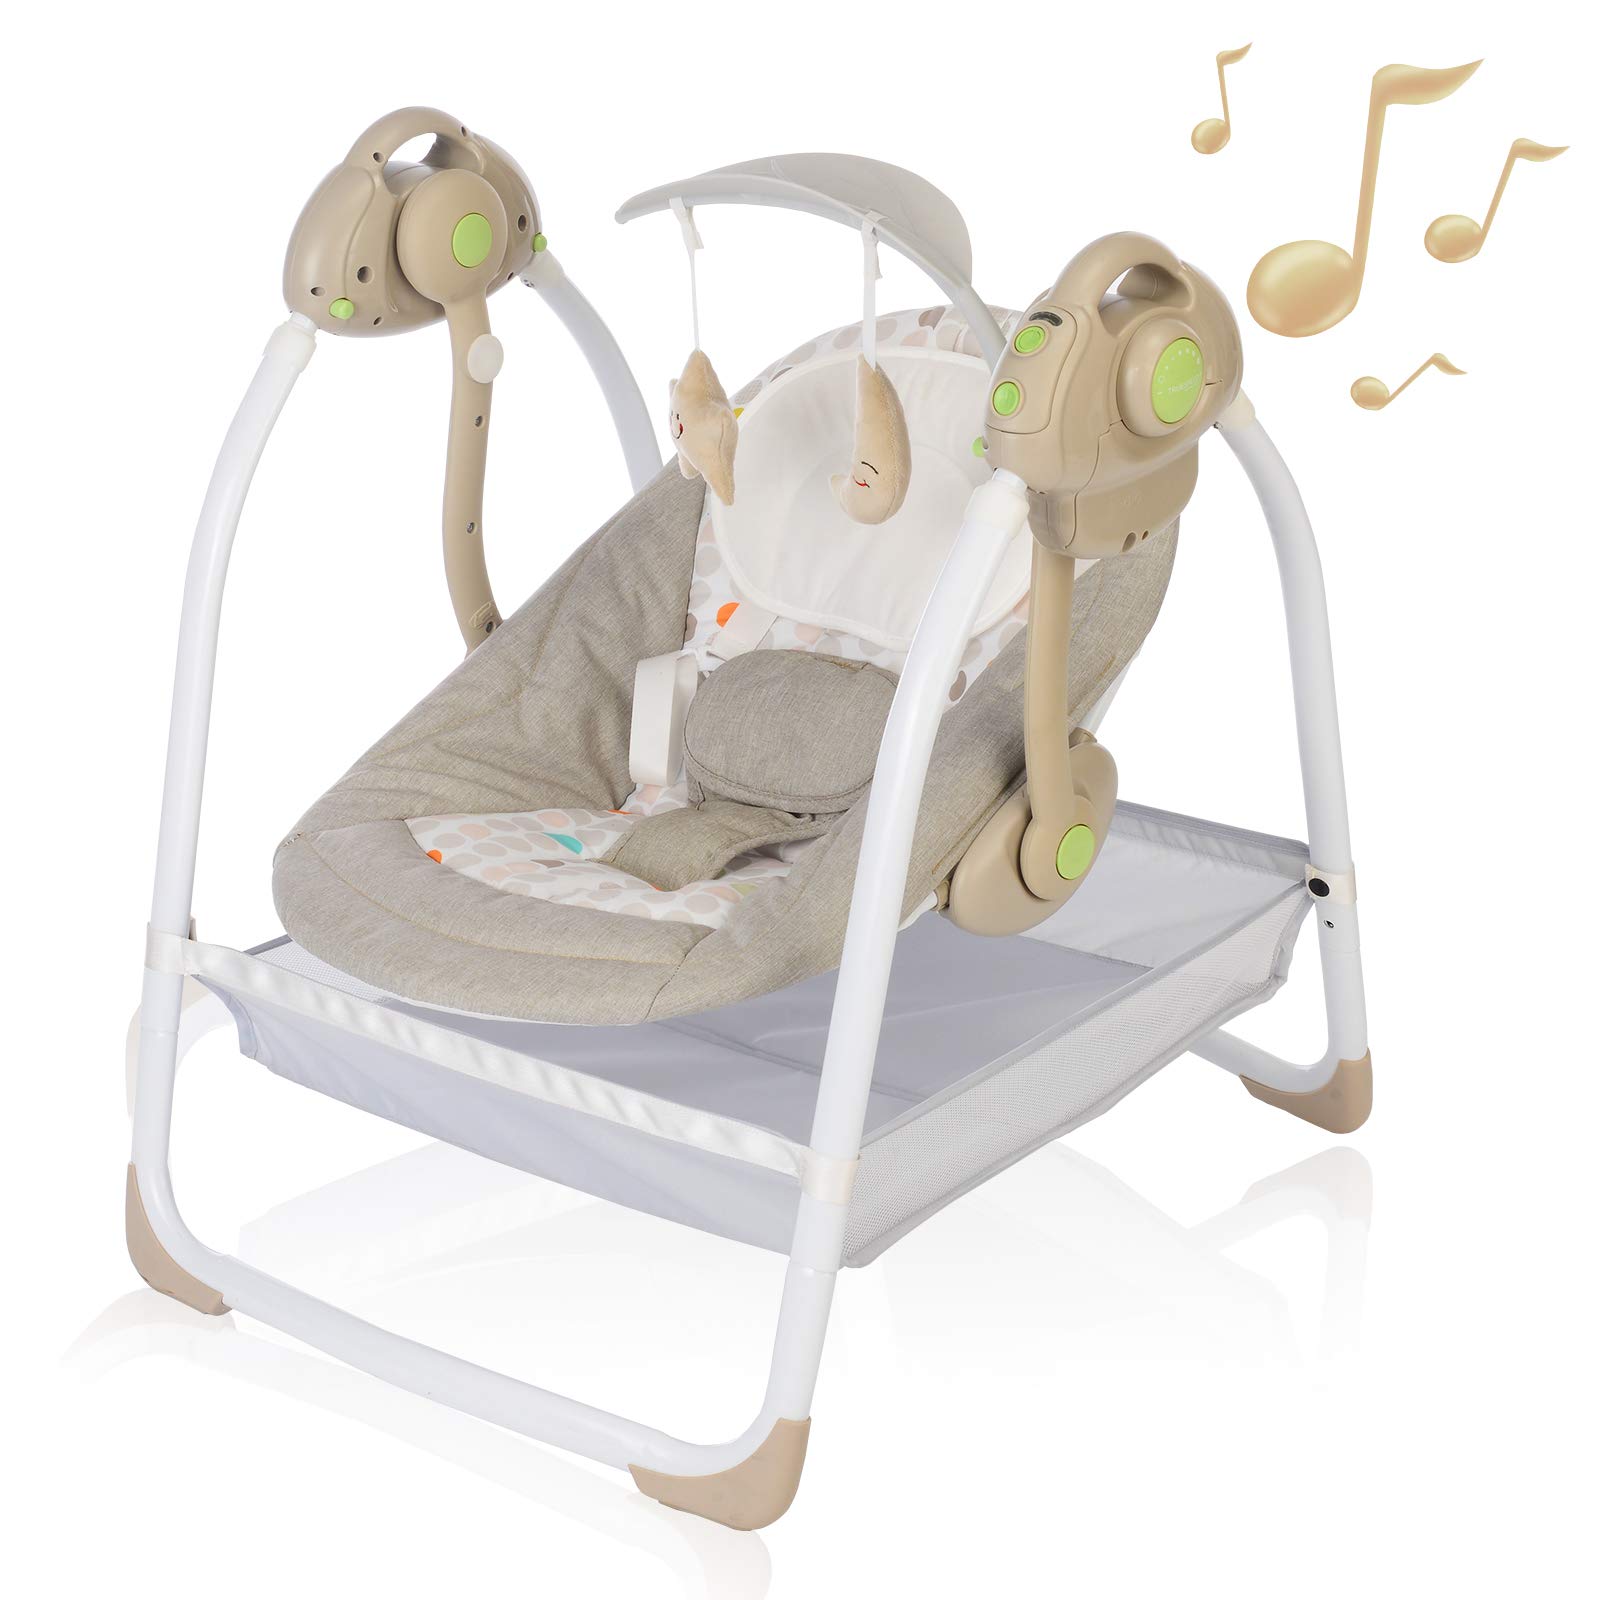 Momobebe Electric Automatic Rocking Chair  with 6 Speeds (60minutes timer)